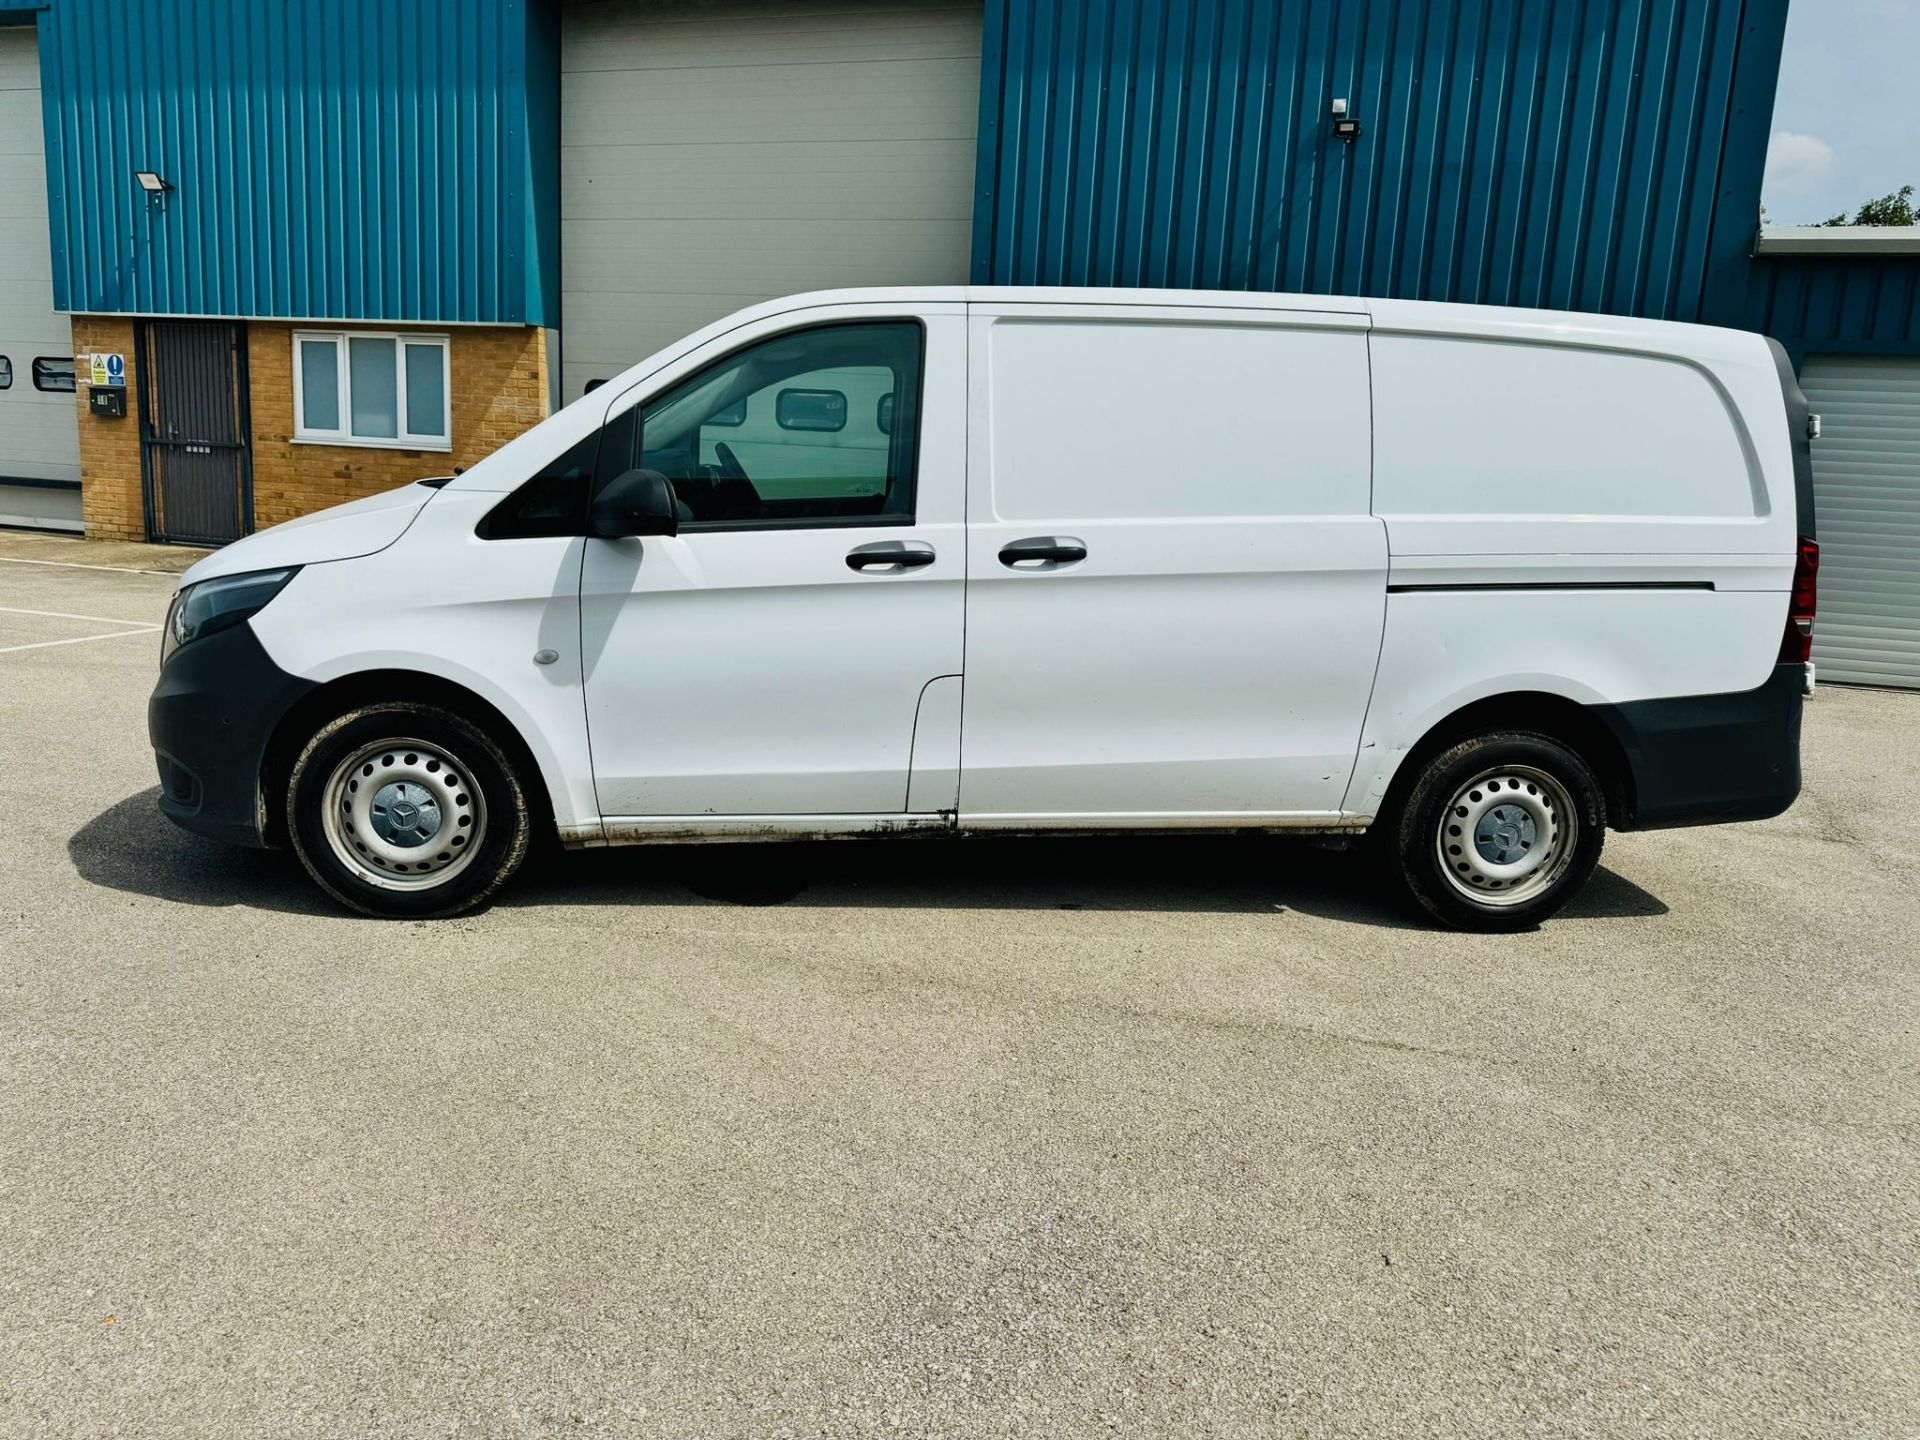 MERCEDES BENZ VITO CDI PURE - 2020 20 Reg - Only 74k Miles - 1 Owner From New - Parking Sensors - Image 4 of 21